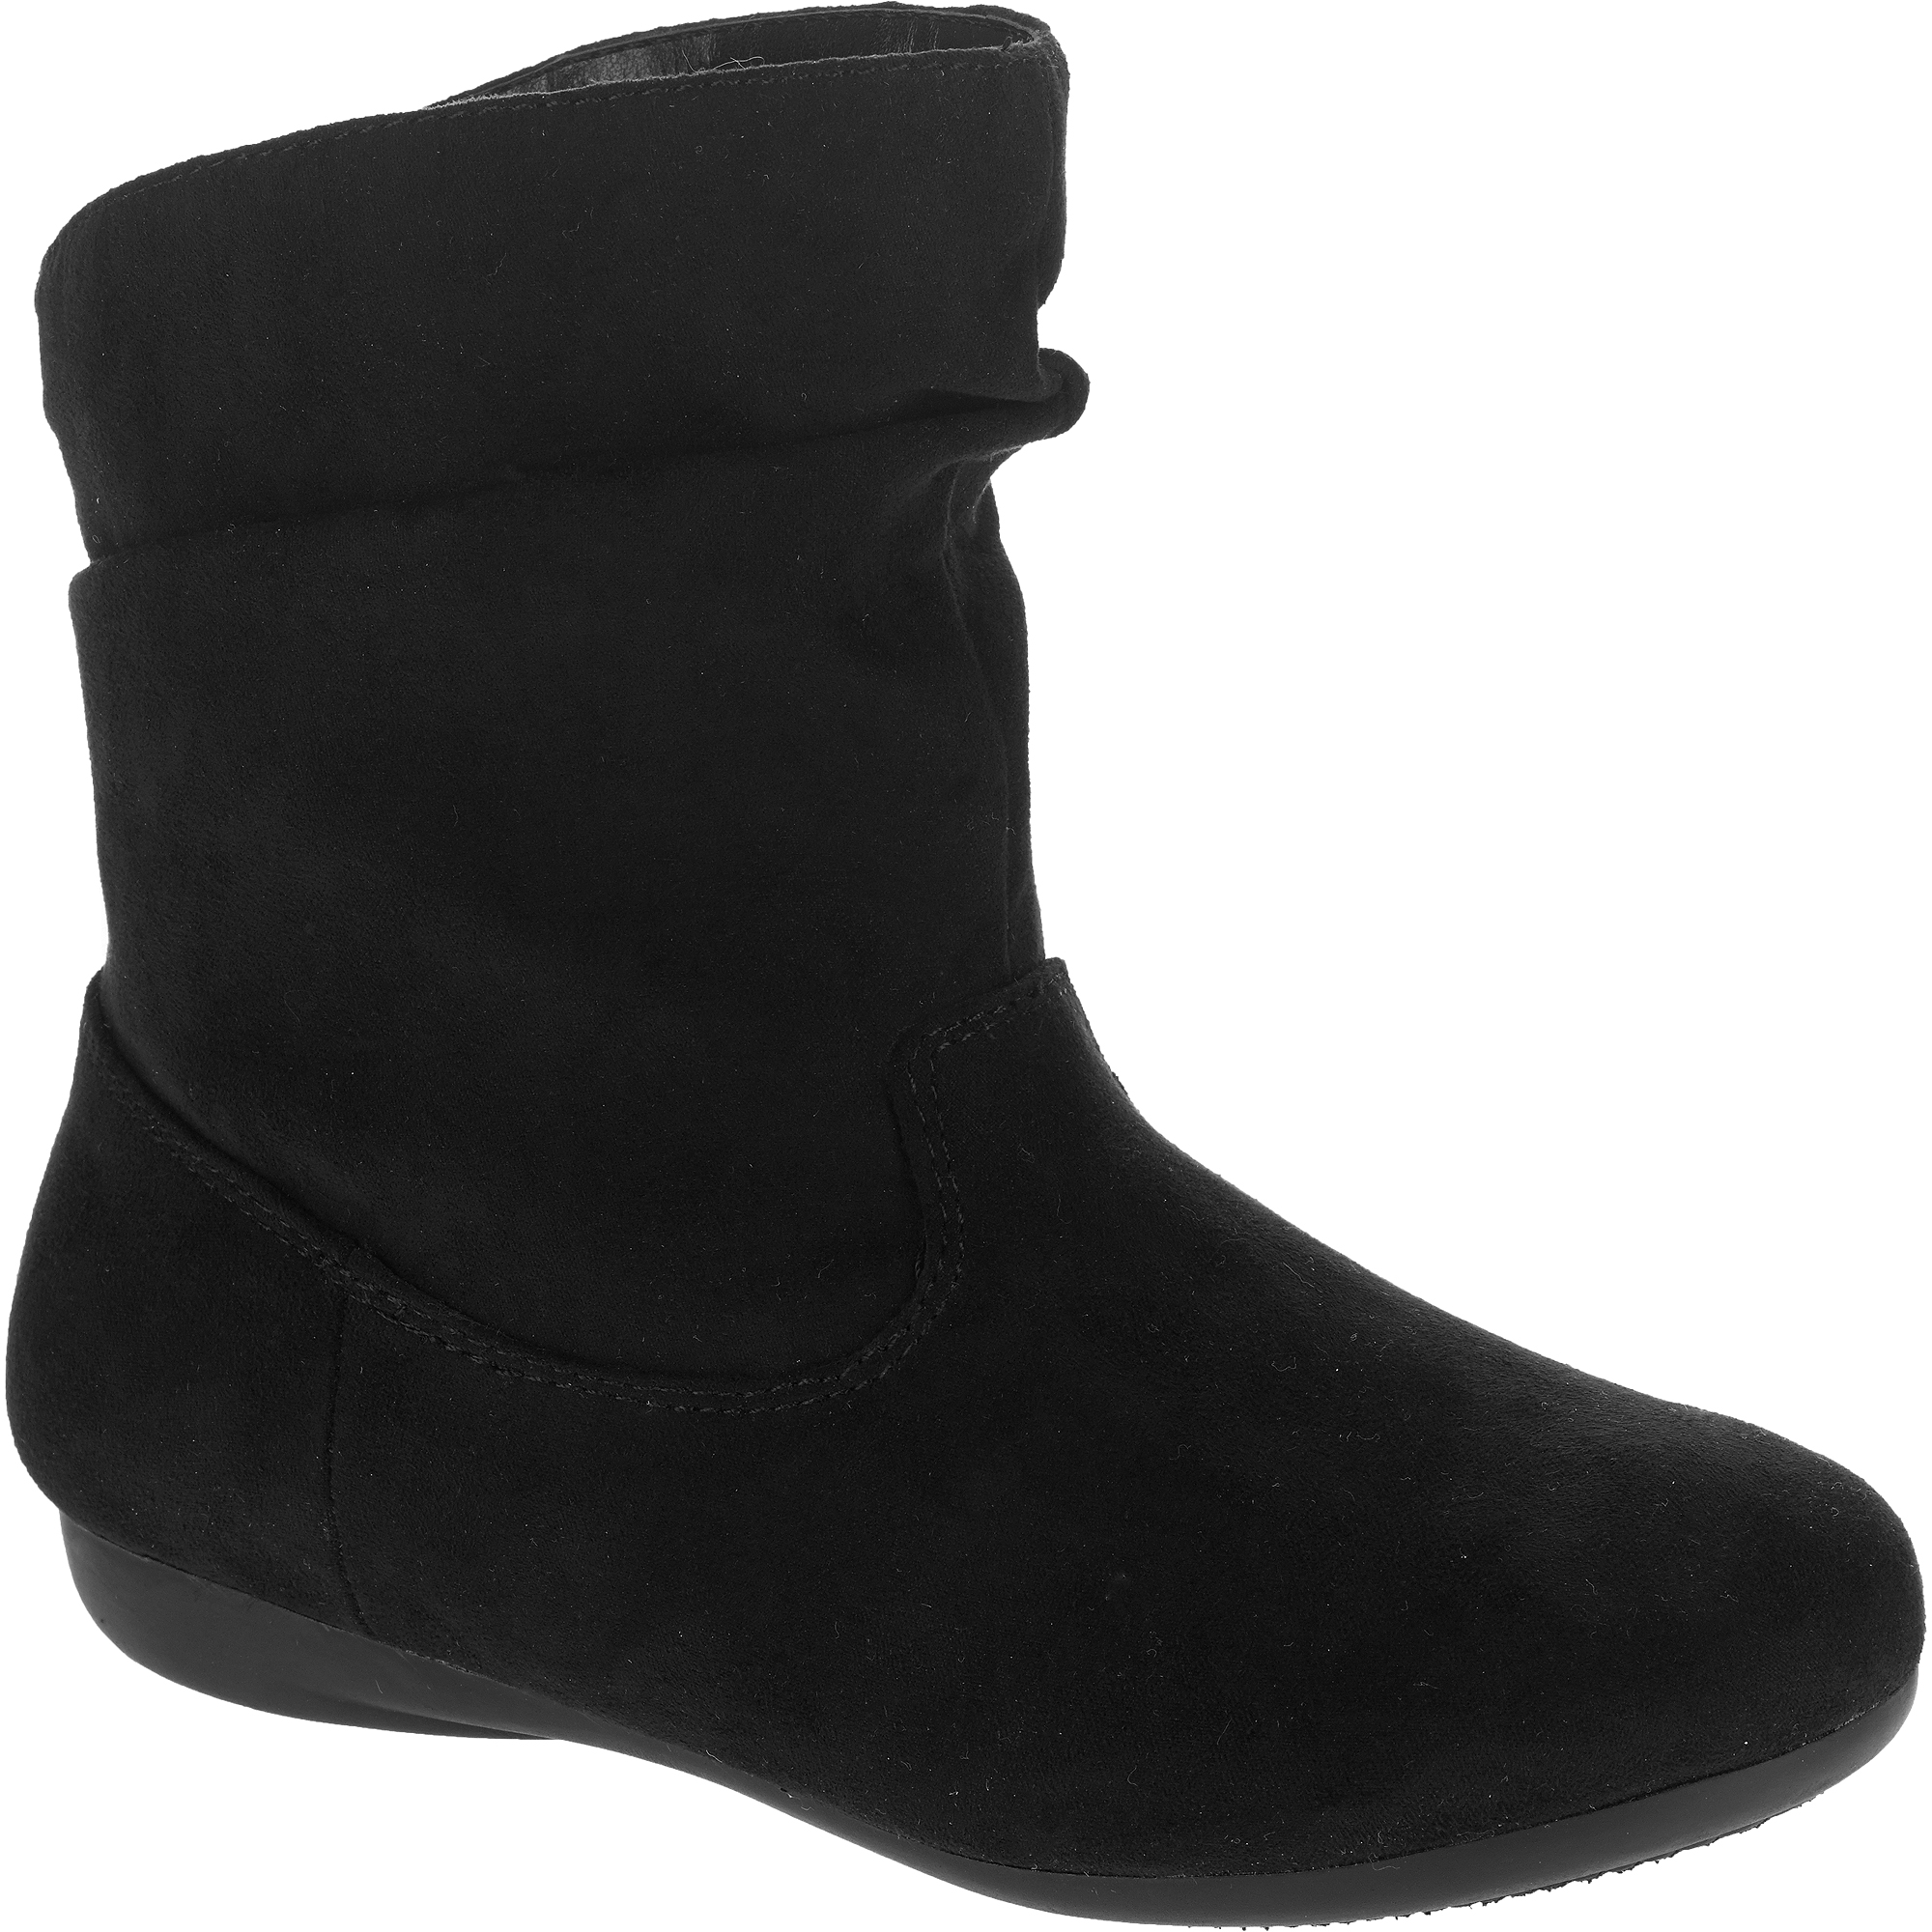 Faded Glory Gm Fg Boot Slouch 14 - image 1 of 5